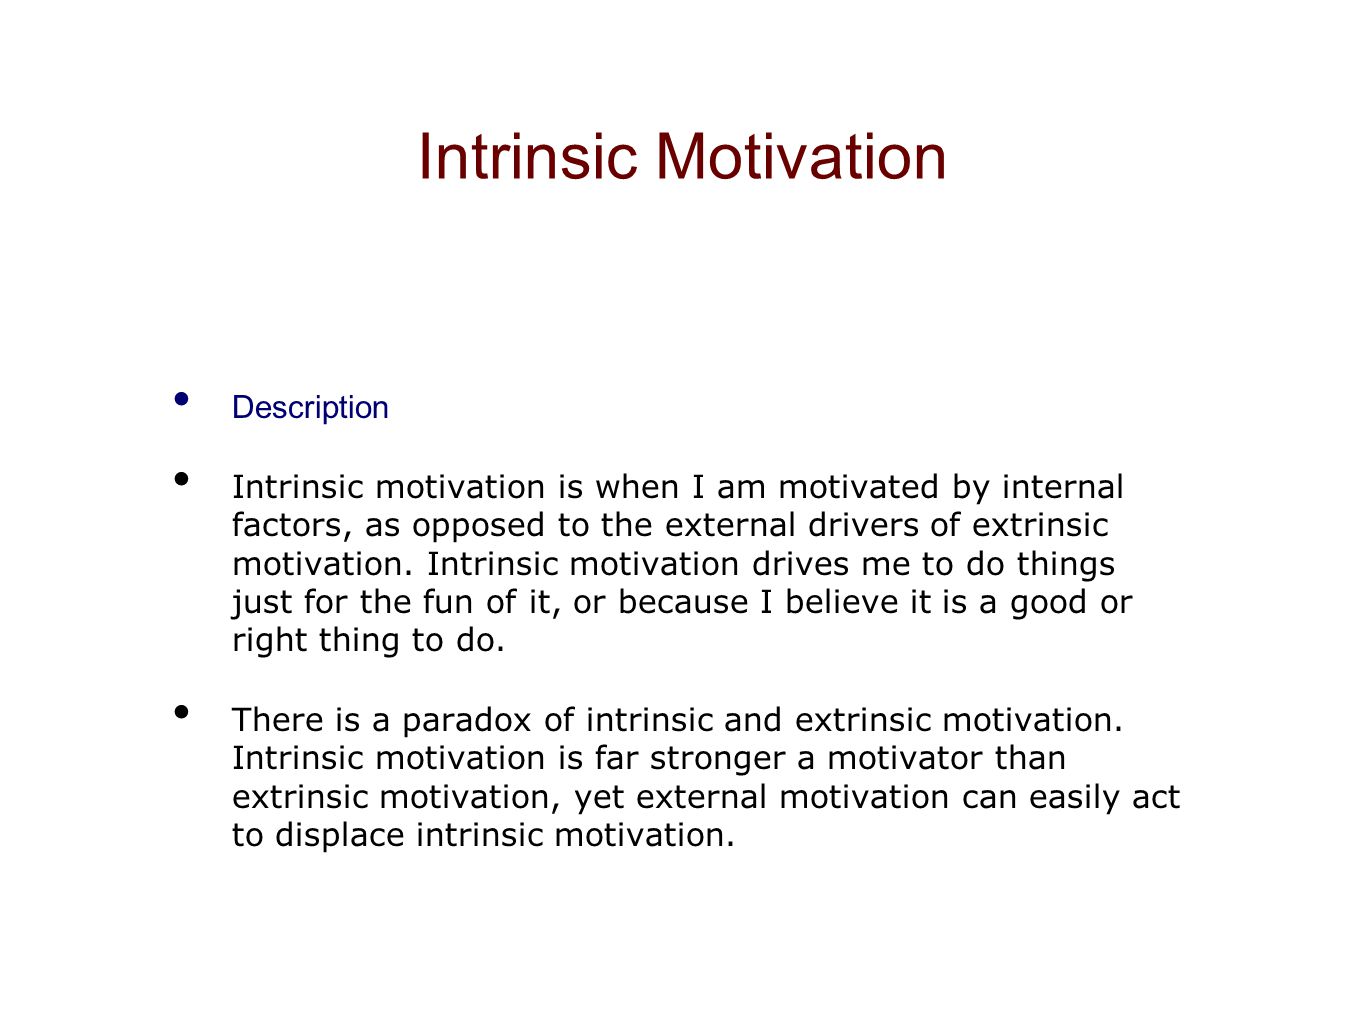 Intrinsic Motivation Description Intrinsic motivation is when I am motivated by internal factors, as opposed to the external drivers of extrinsic motivation.